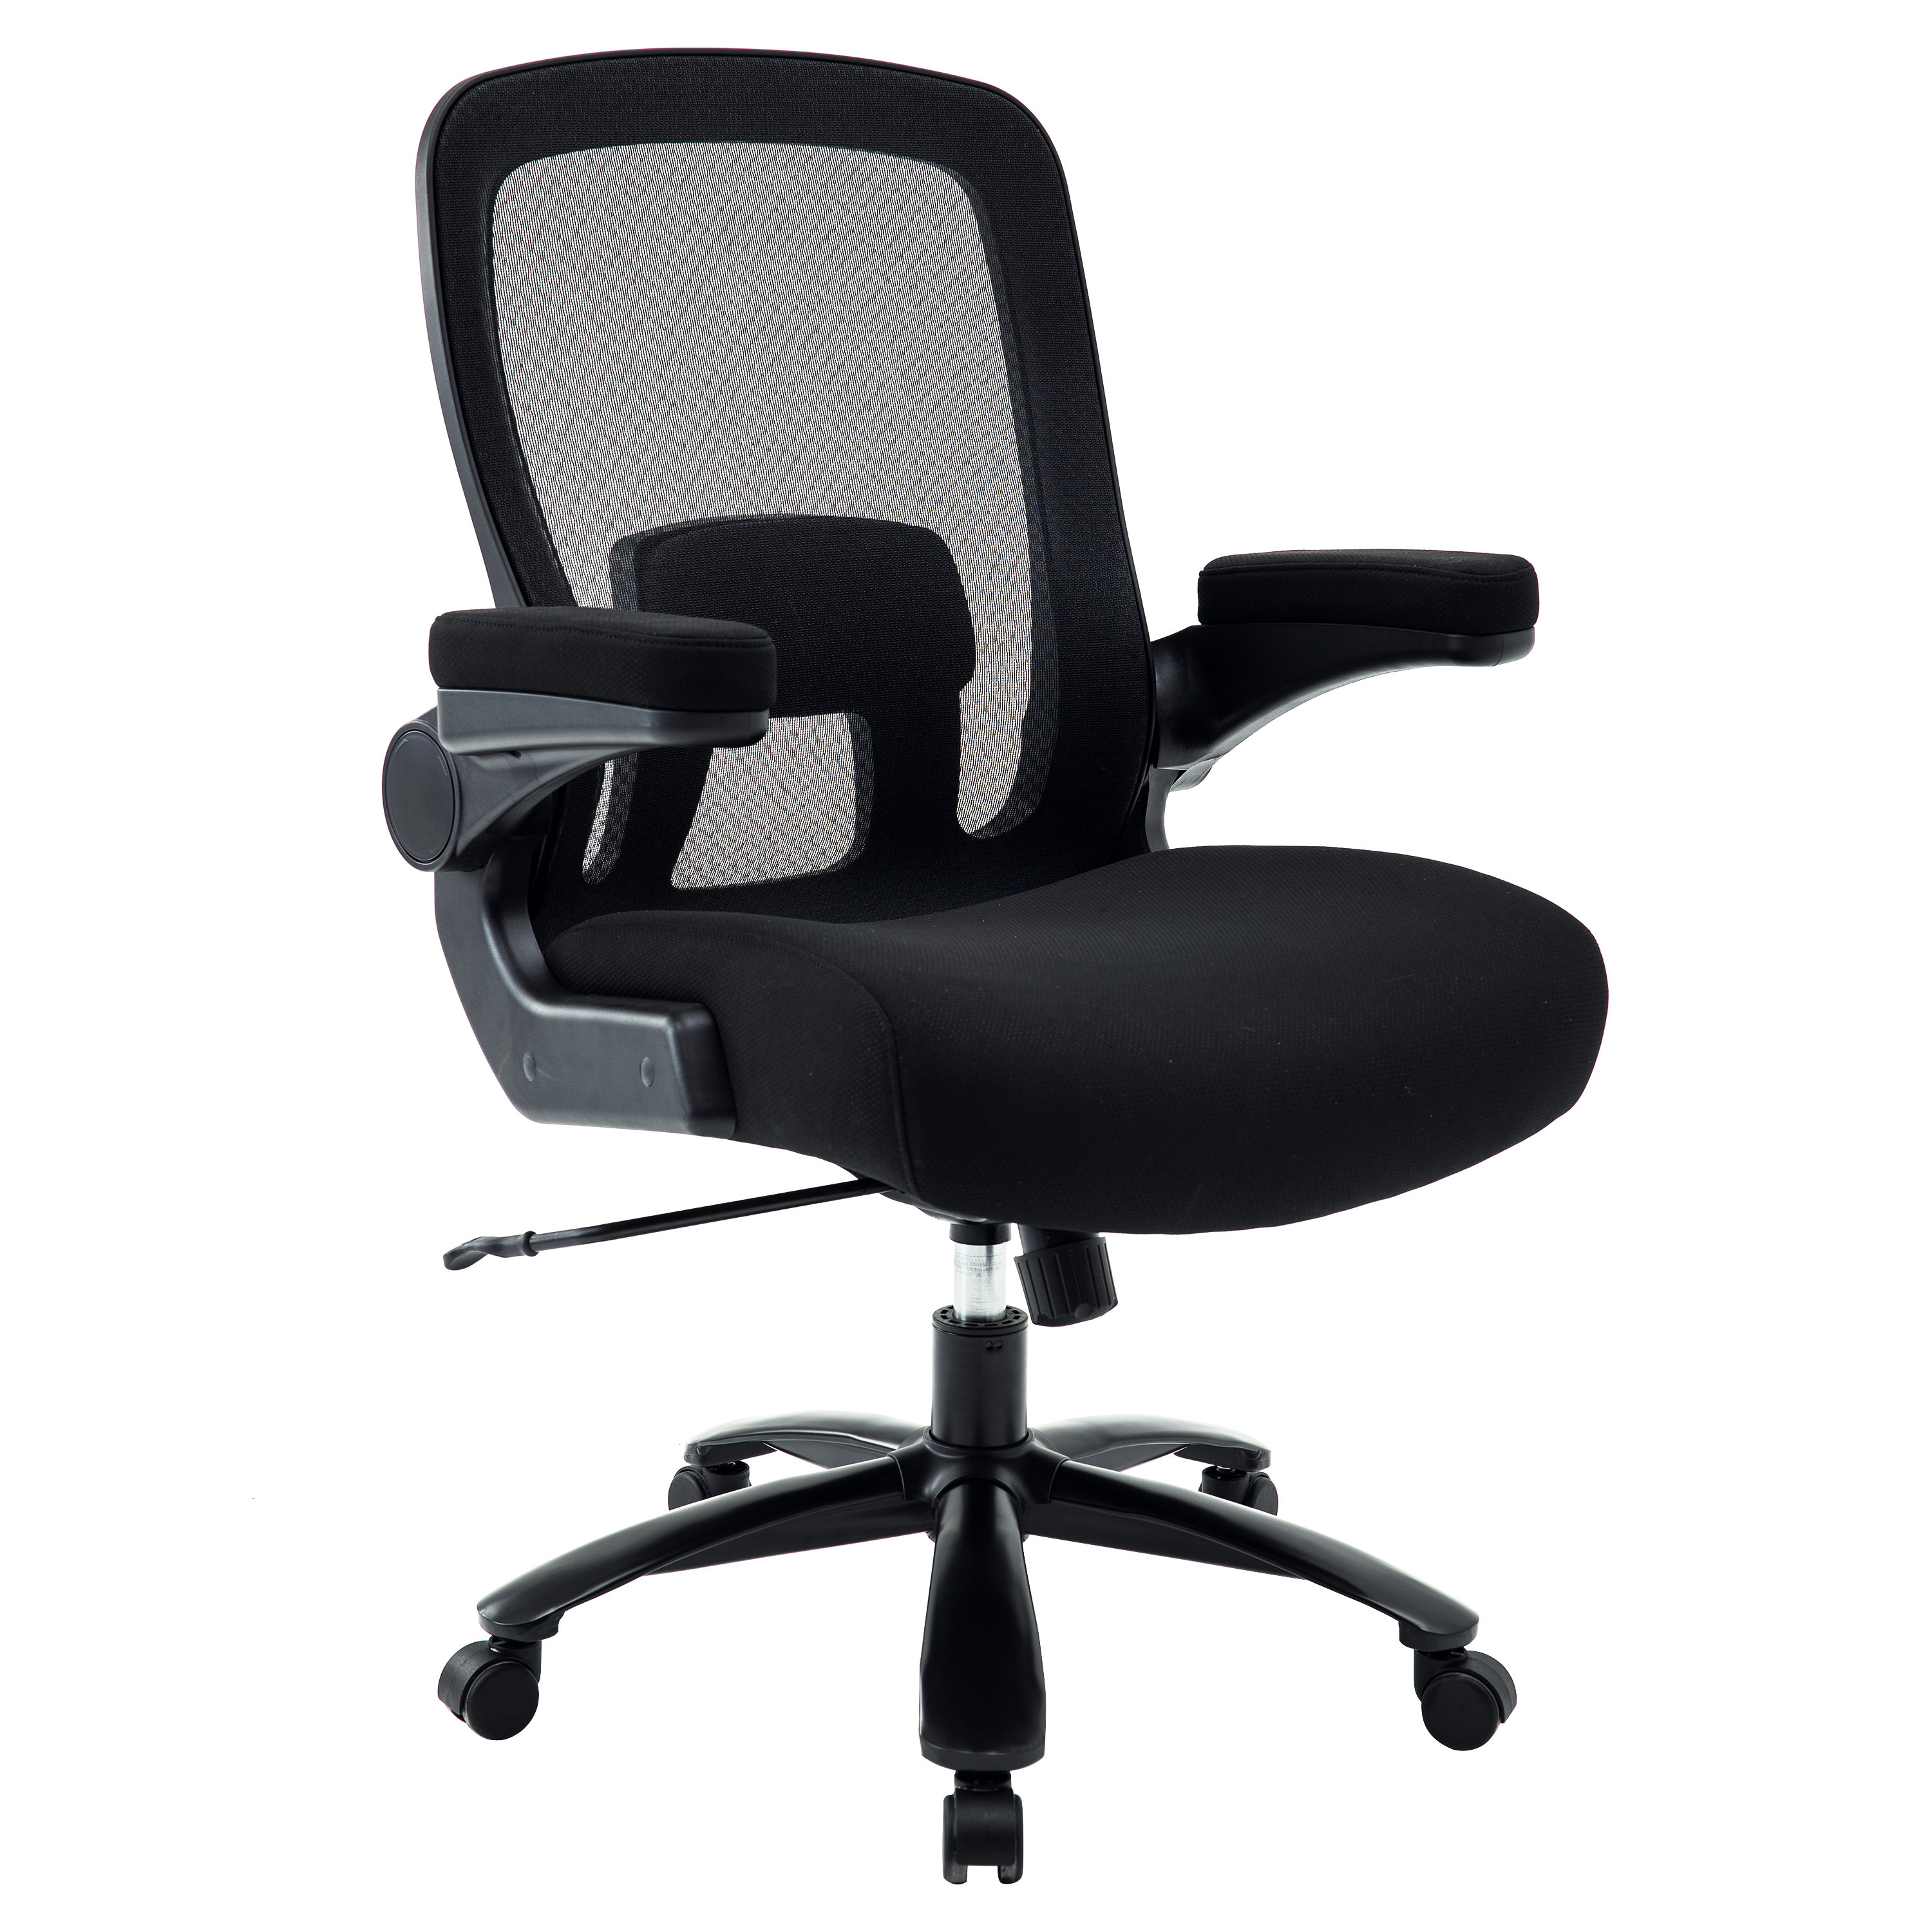 Big and Tall 500lbs Office Chair - Adjustable Lumbar Support 3D